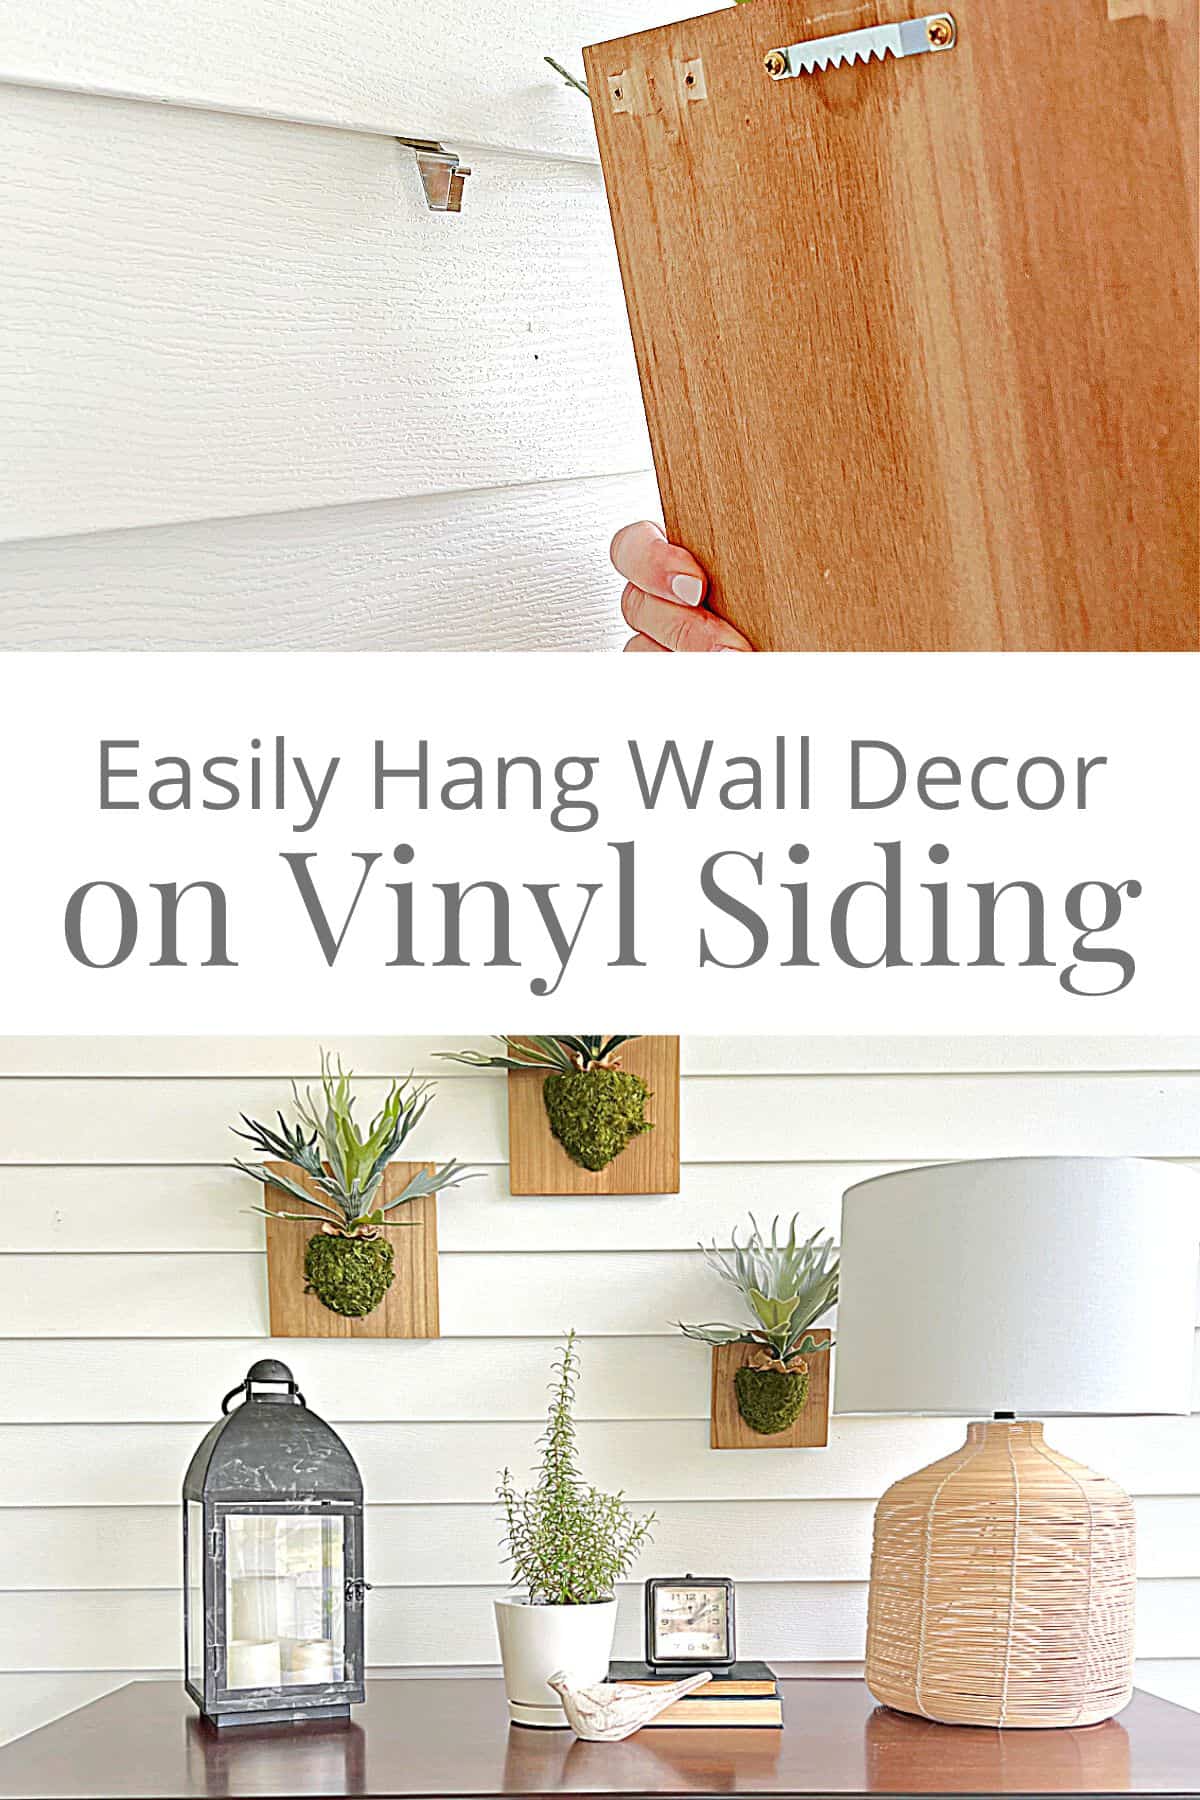 hanging picture on hook on vinyl siding and wall art display over cabinet